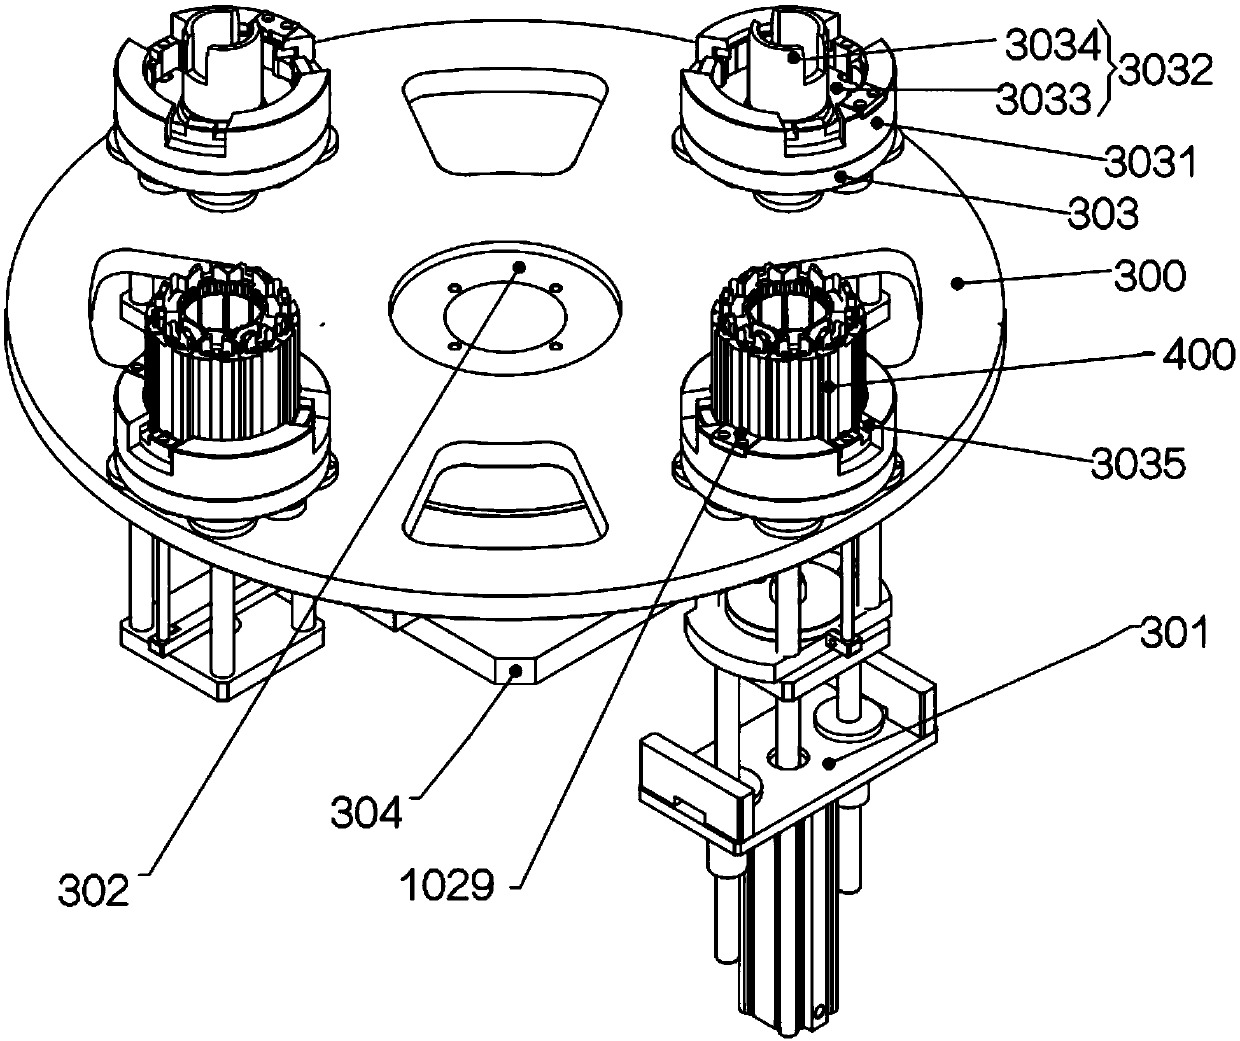 Pre-insertion indexing mechanism for motor stator insulated slot wedge